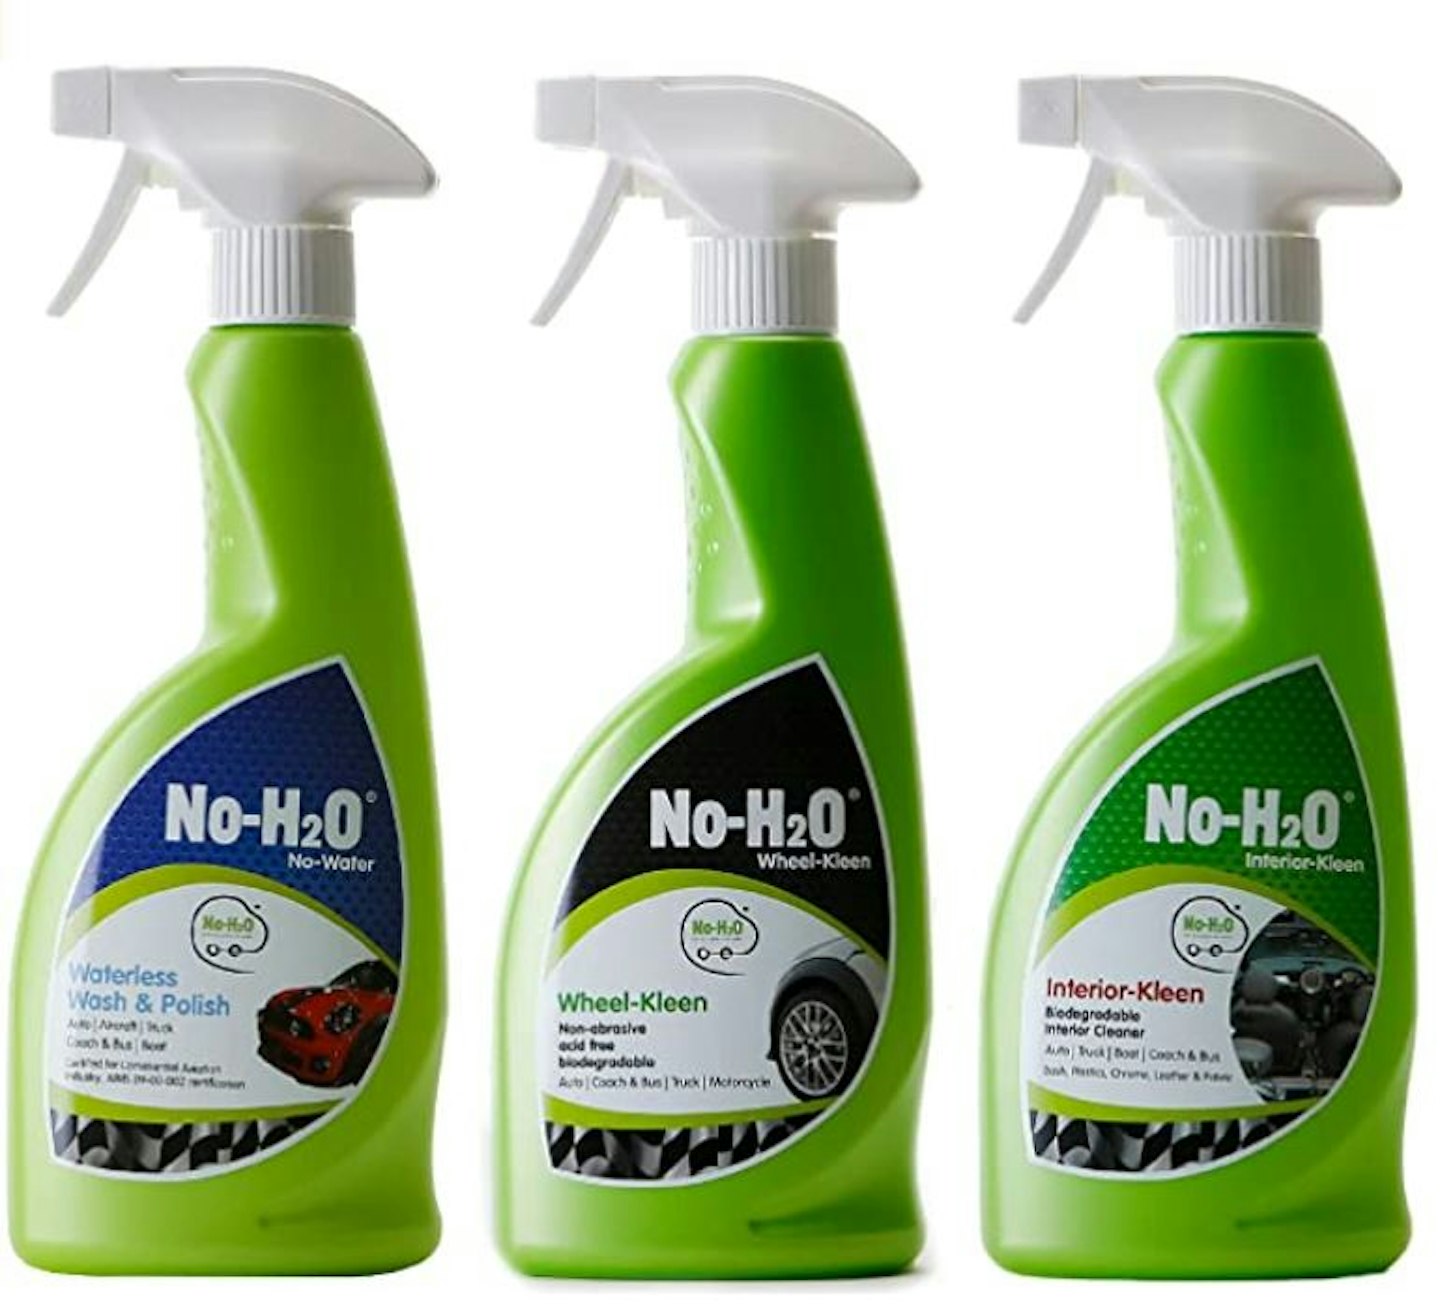 No-H2O Car Cleaning Kit